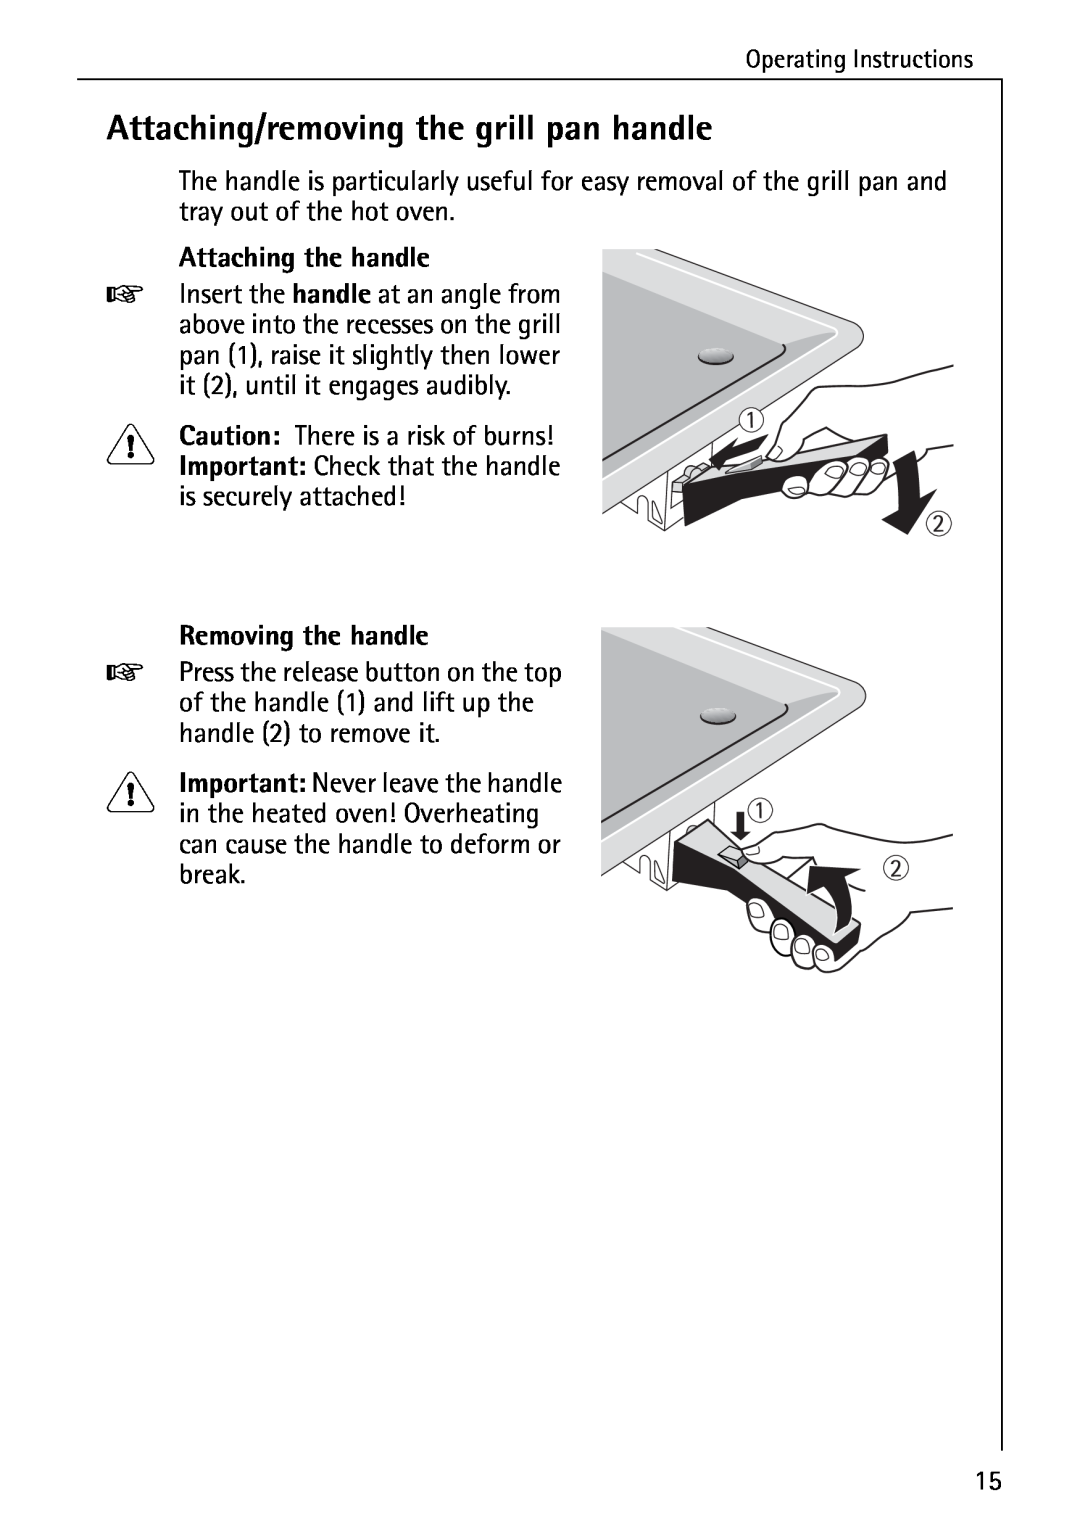 AEG B 2100 operating instructions Attaching/removing the grill pan handle, Attaching the handle, Removing the handle 